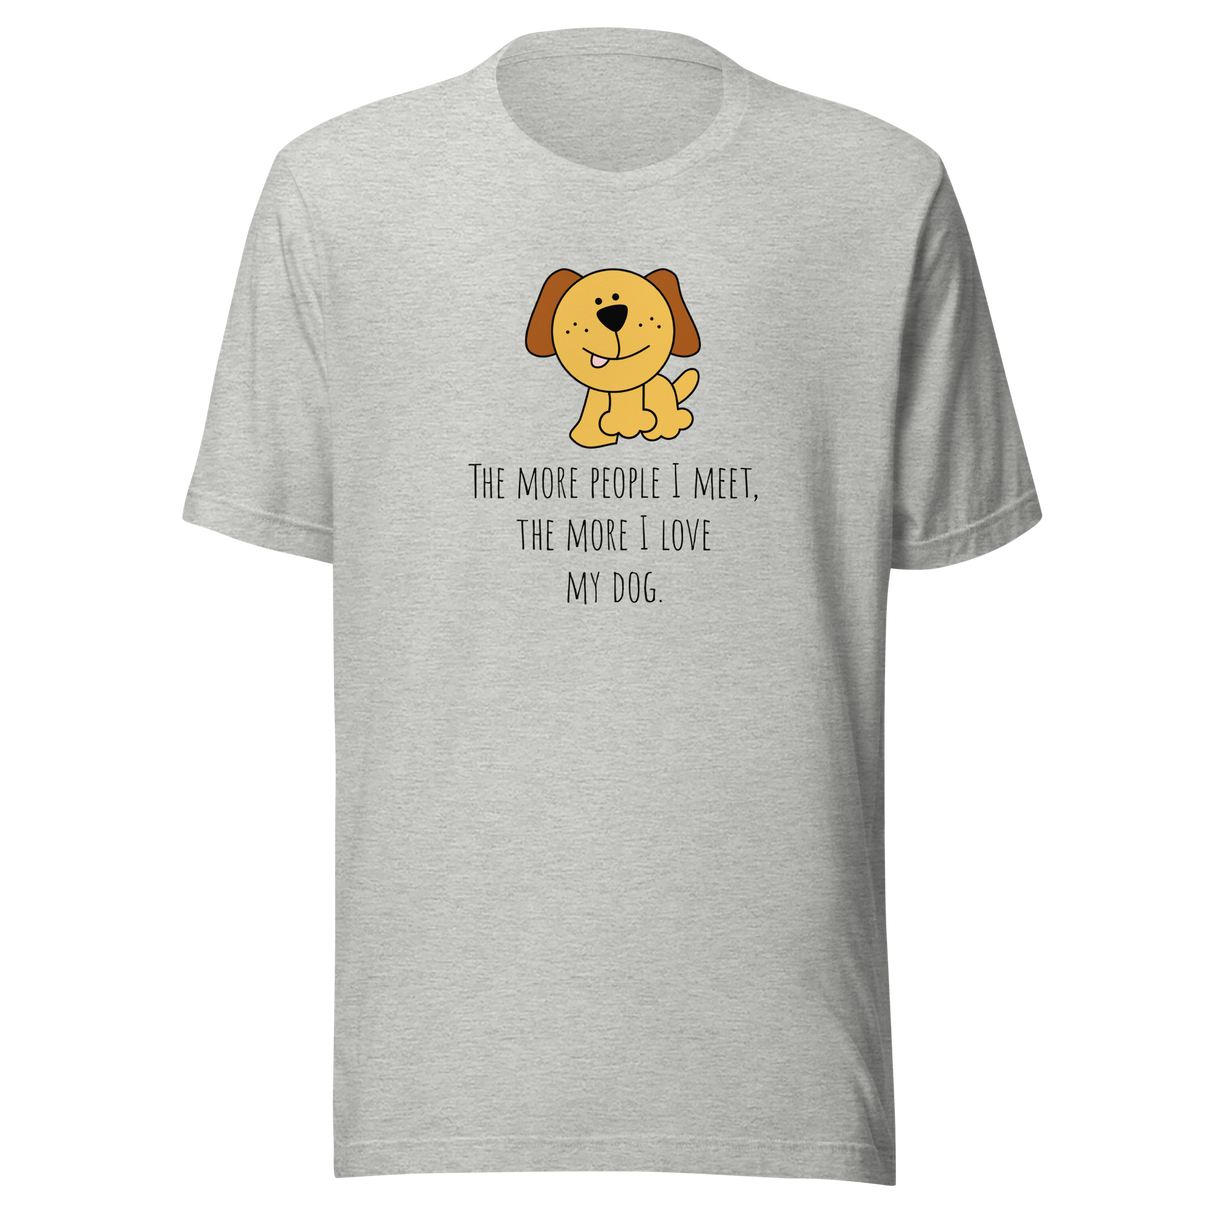 the-more-people-i-meet-the-more-i-love-my-dog-love-my-dog-tee-dog-t-shirt-dog-lover-tee-puppy-t-shirt-dog-mom-tee#color_athletic-heather